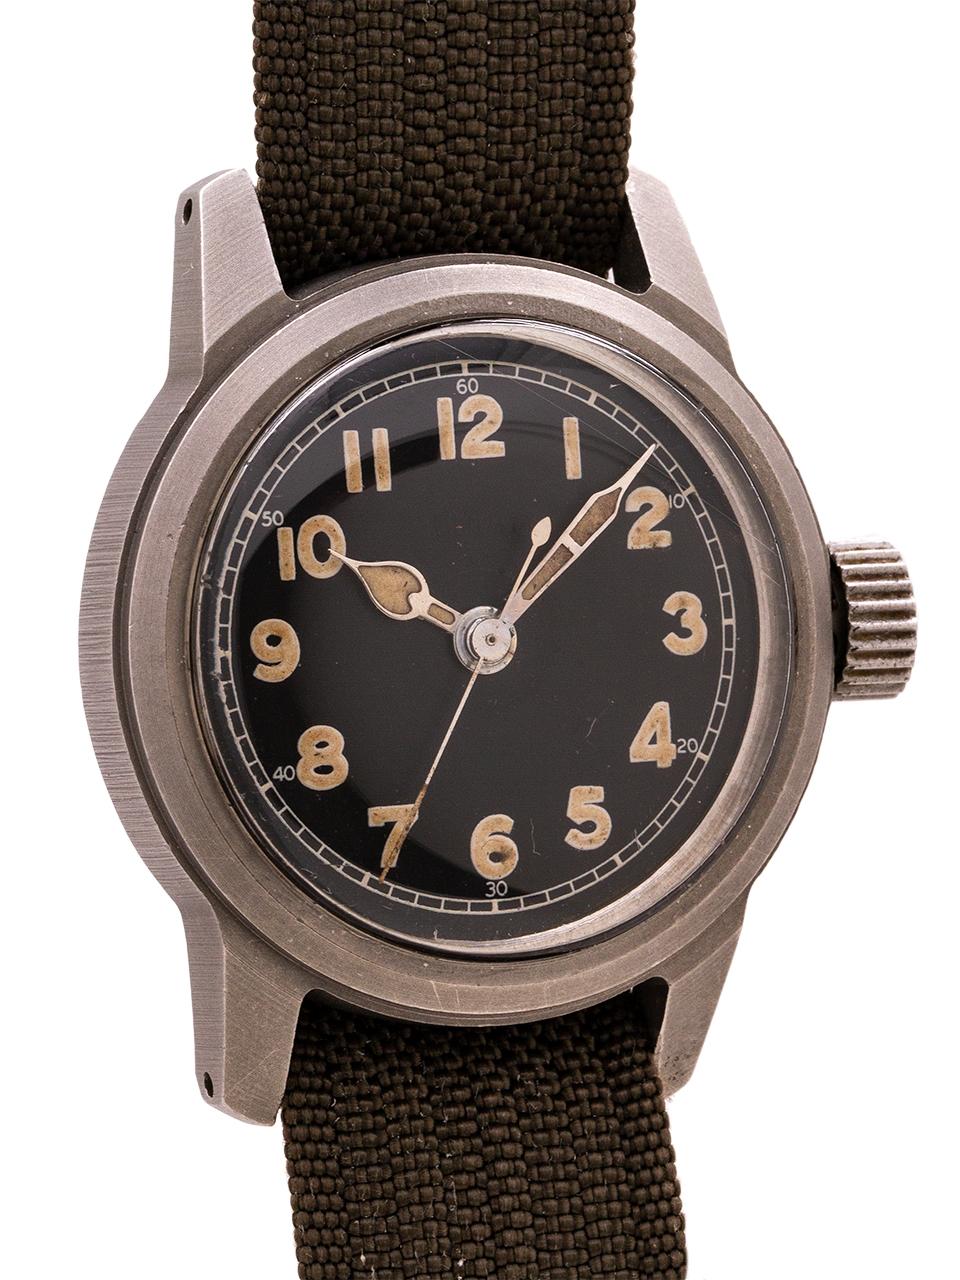 
Elgin WWII era U.S. Government issued wristwatch. 32mm case, matte black dial with arabic luminous numerals and hands. Screw down caseback engraved back, reading “U.S. GOV’T GRADE II. Featuring the manual wind Caliber 805 with sweep seconds.

Fully